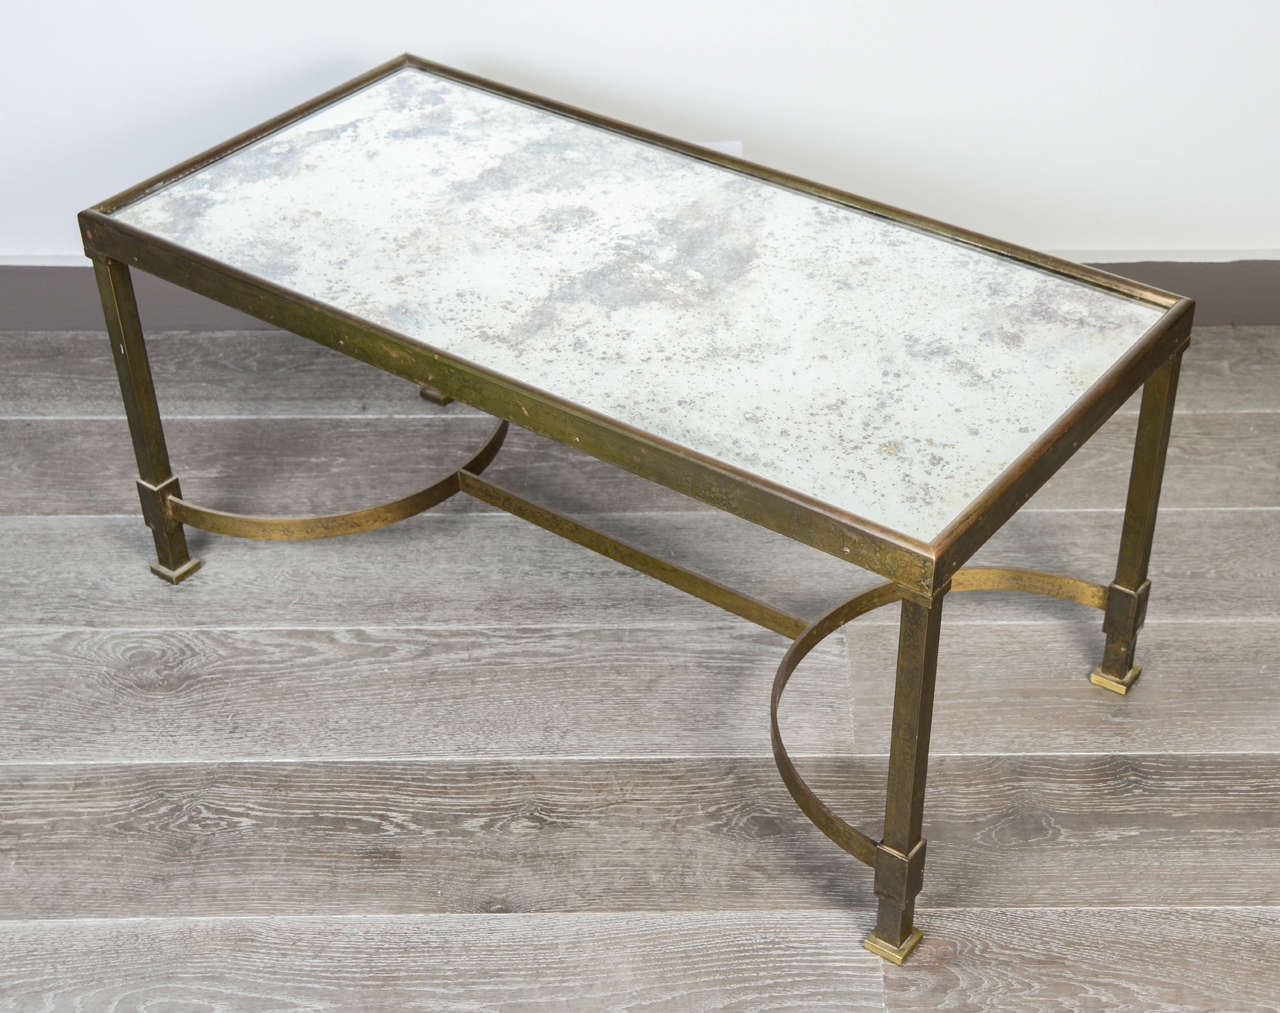 Elegant pair of tables with base in metal oxidized with acid and top surface in the original mirror.
Attributed to Eugene Printz, circa 1935-1940.
Some uses on top.